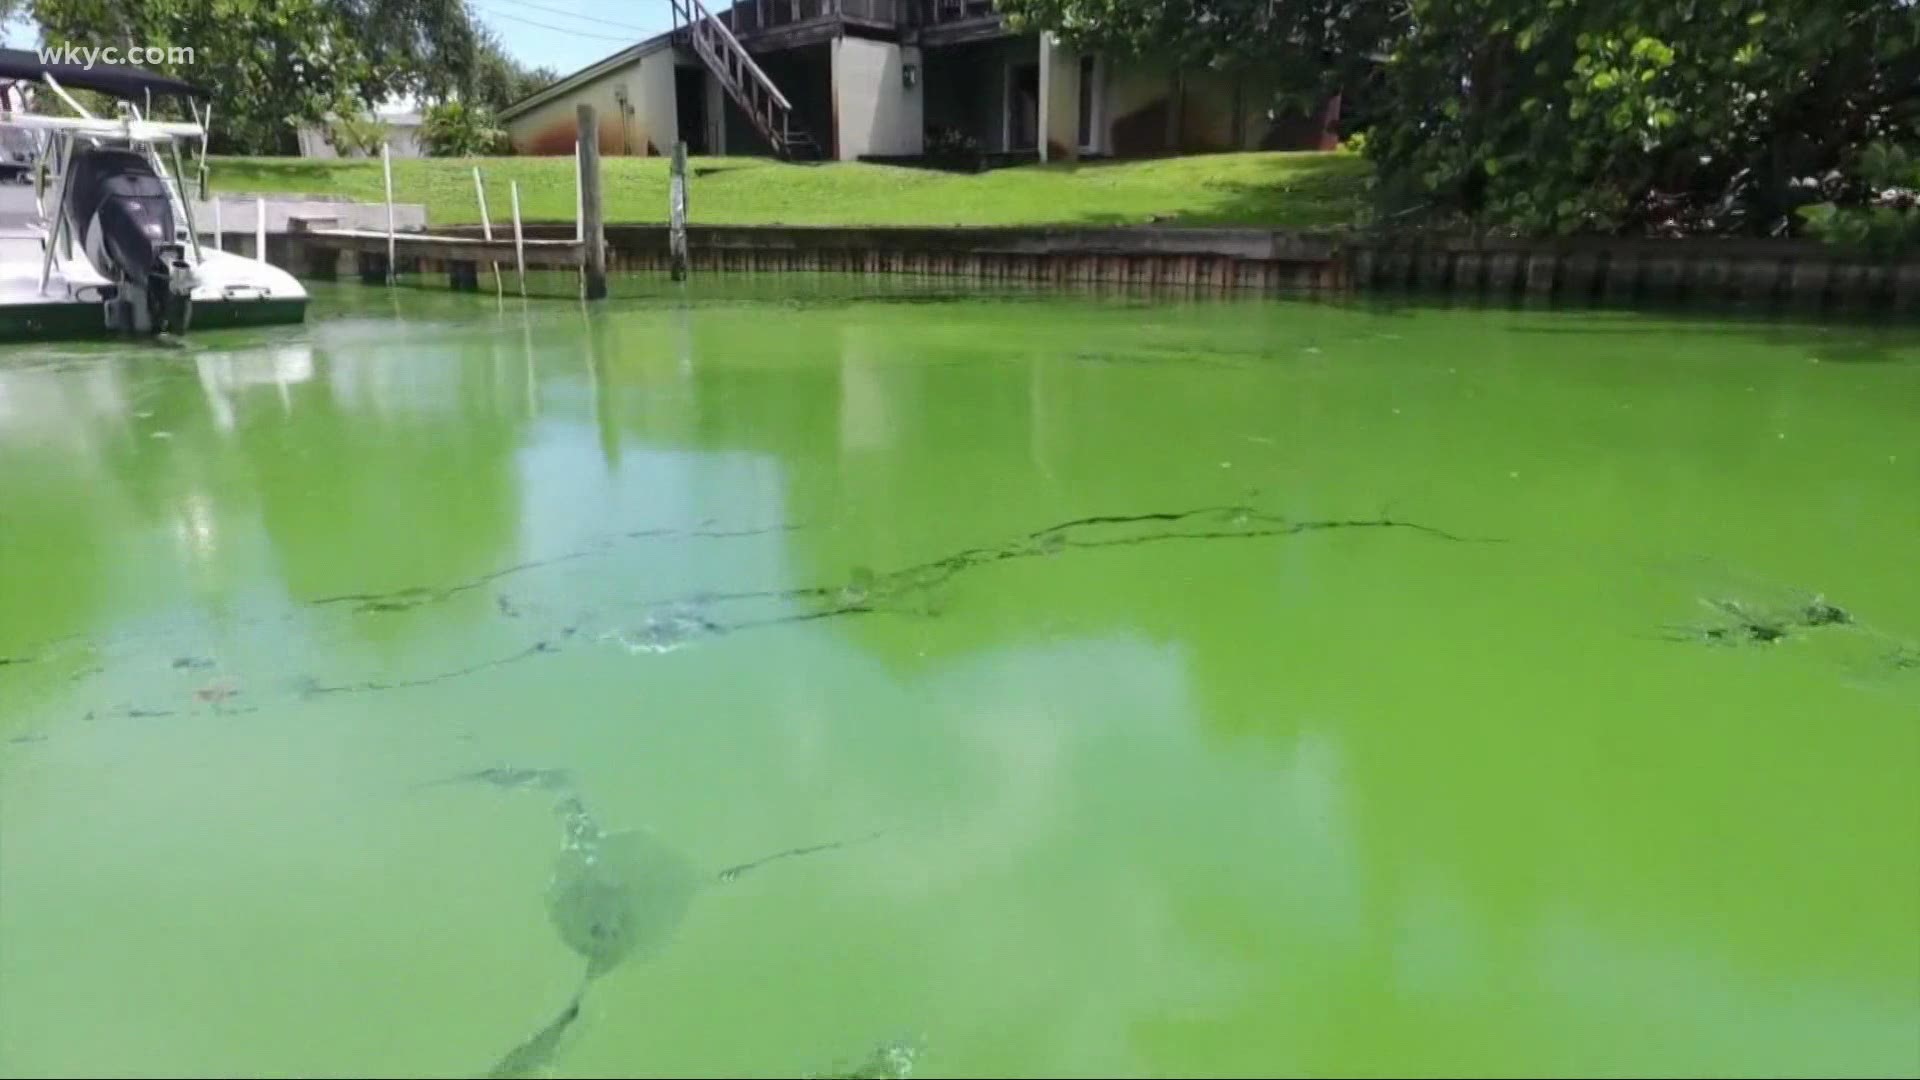 It's called Lake Erie's Green Monster, the giant algae bloom that forms on the lake in the summer.